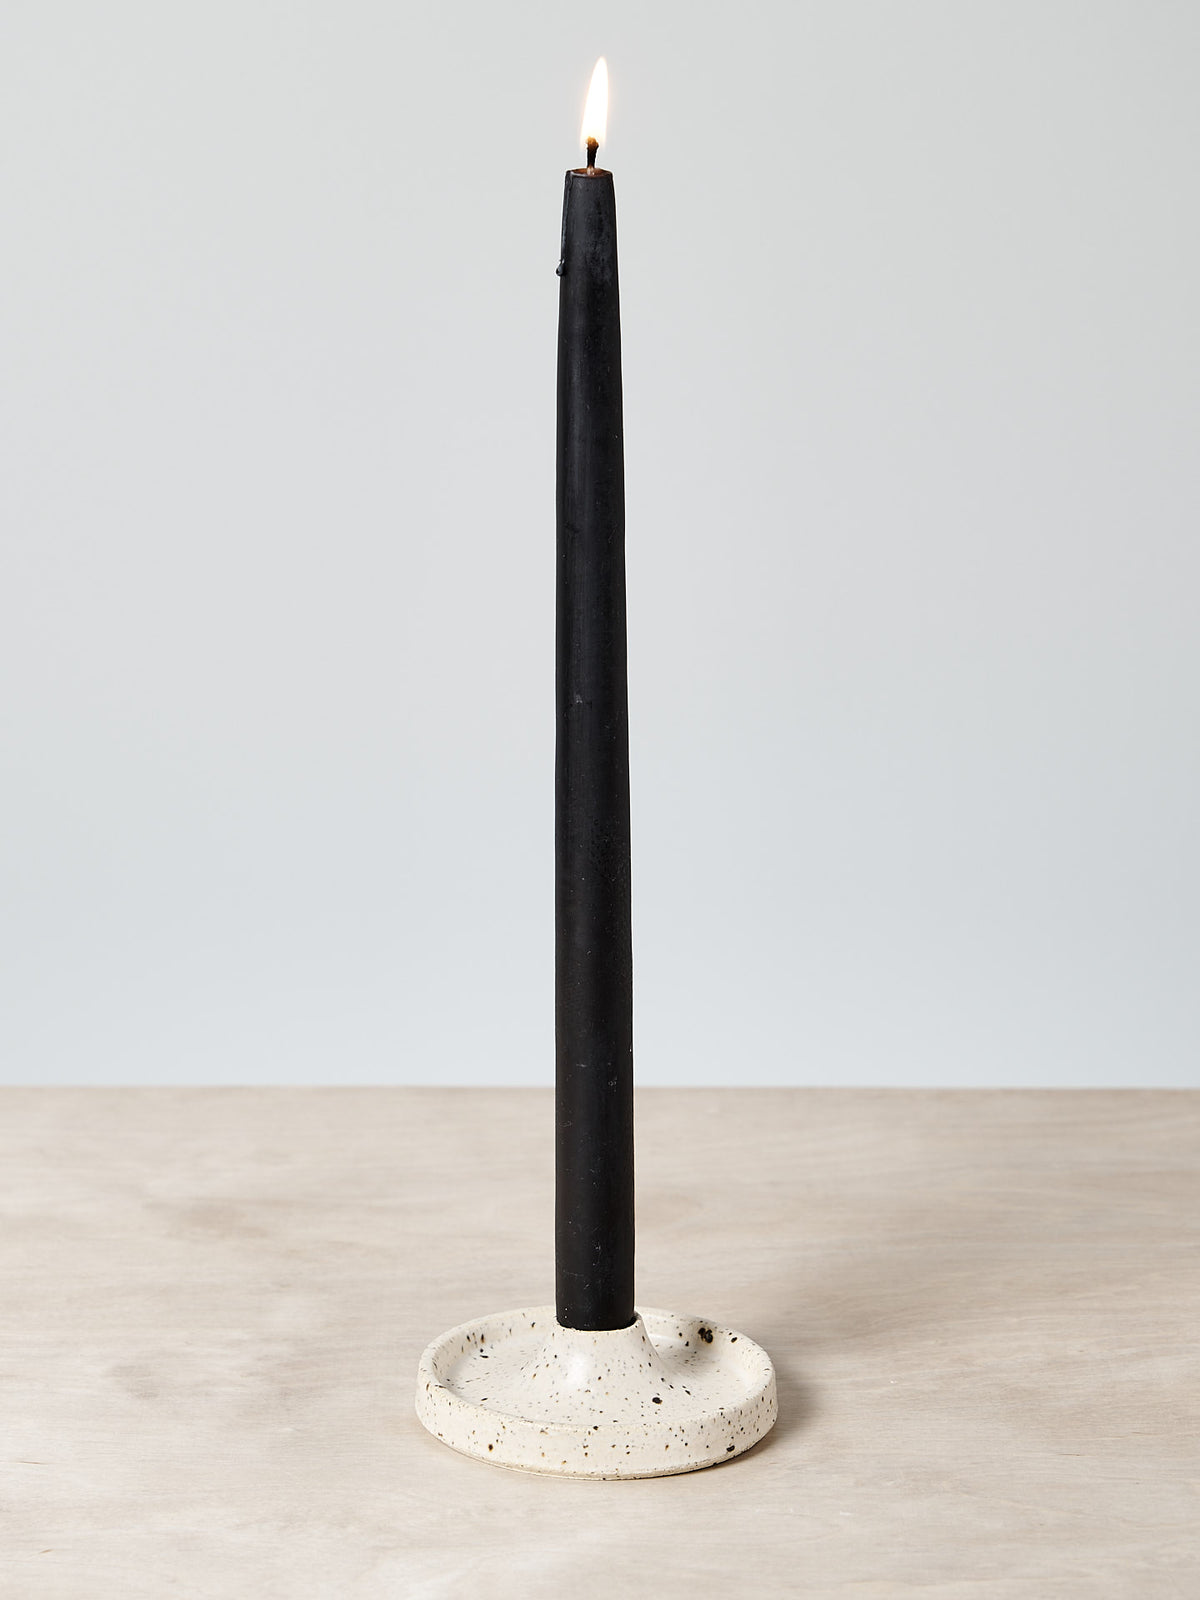 A Candle Holder – Toi Toi is sitting on a wooden table.